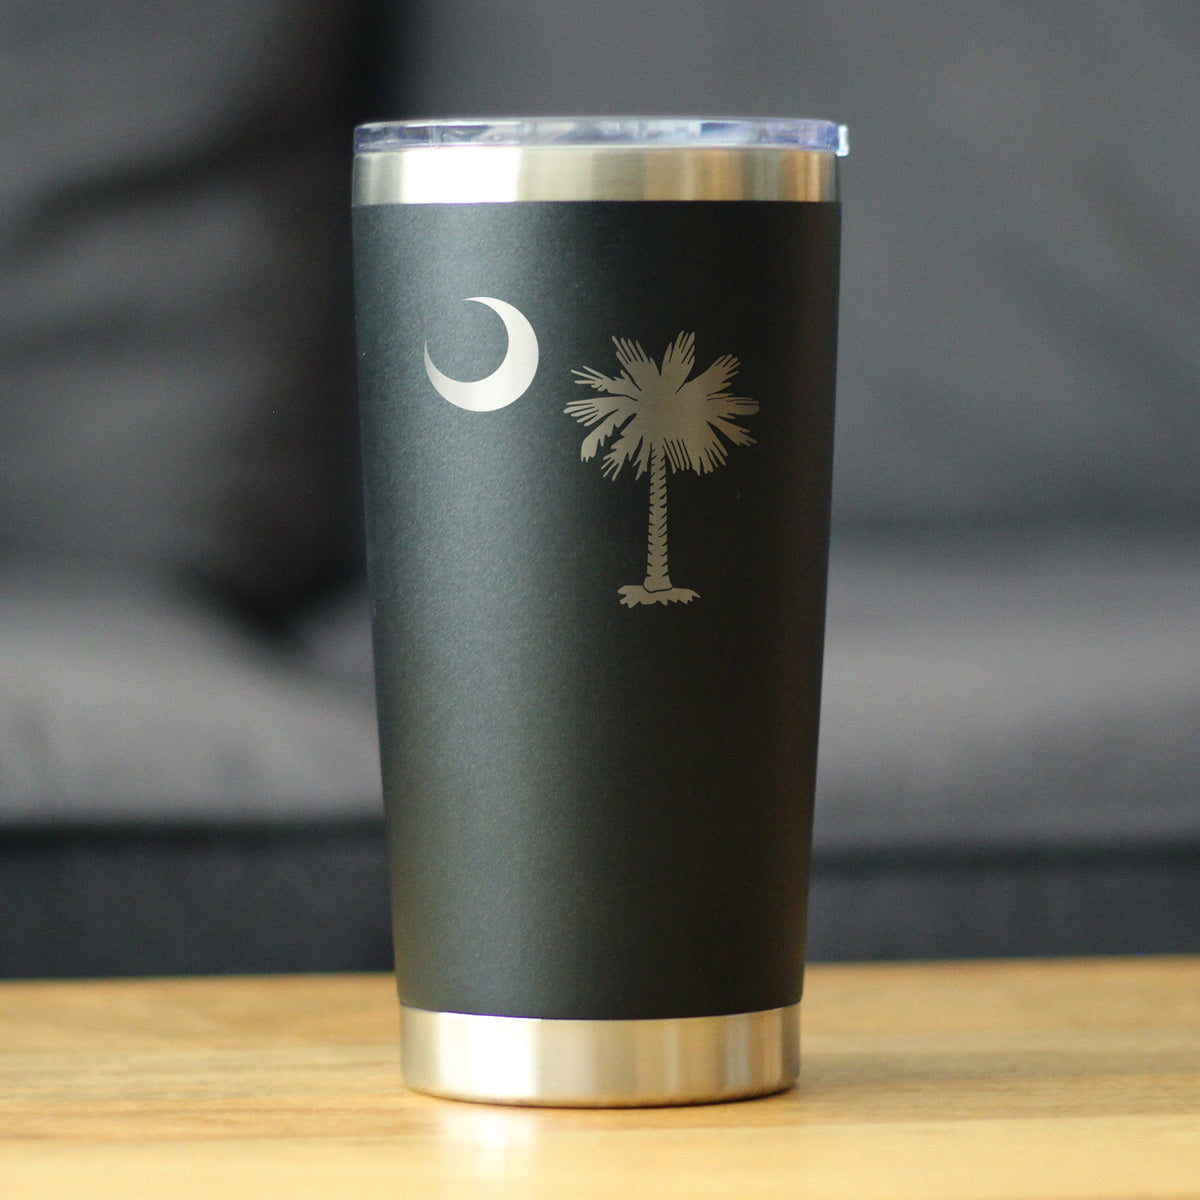 South Carolina Flag - Insulated Coffee Tumbler Cup with Sliding Lid - Stainless Steel Insulated Mug - State Themed Drinking Decor and Gifts for South Carolinian Women &amp; Men